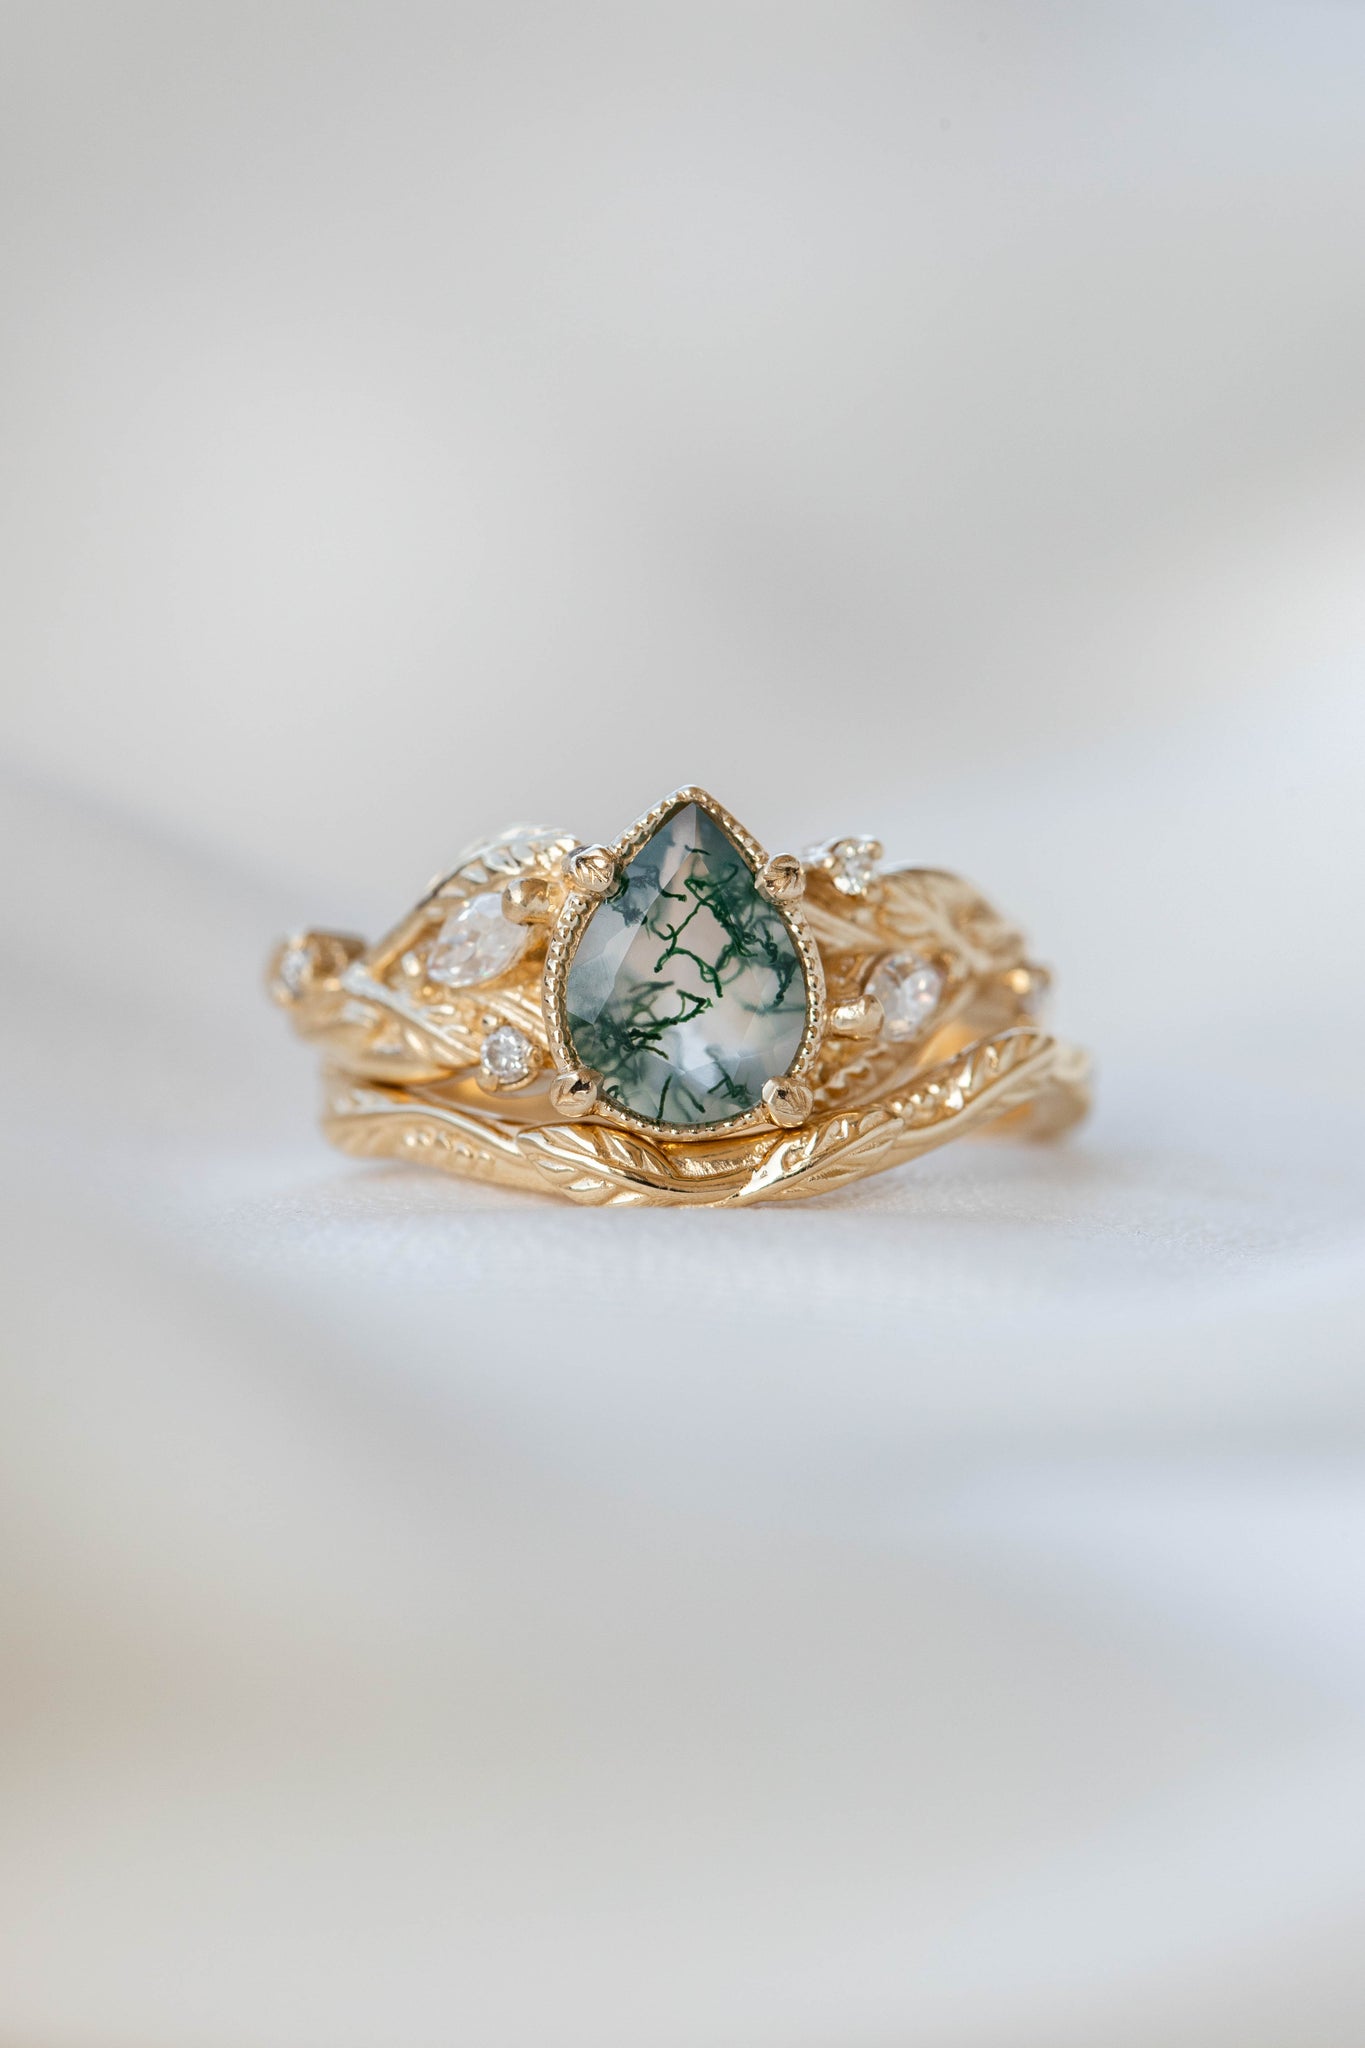 READY TO SHIP: Patricia ring in 14K or 18K yellow/white/rose gold, natural moss agate pear cut 8x6 mm, accent moissanites, AVAILABLE RING SIZES: 6-8US - Eden Garden Jewelry™